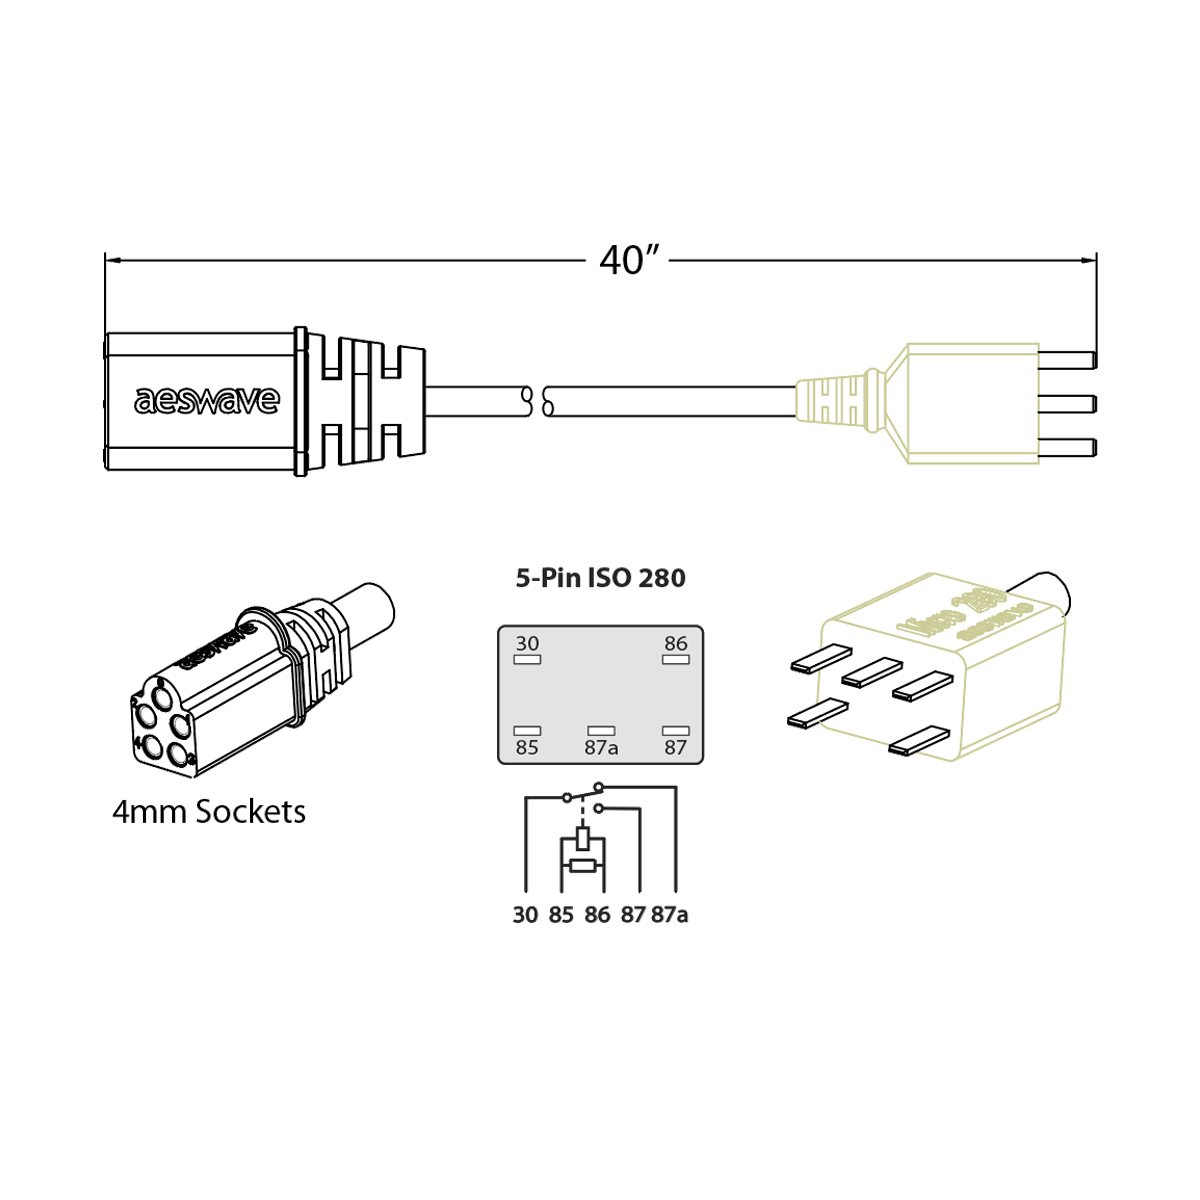 uActivate 5-Pin ISO 280 Cable Specifications